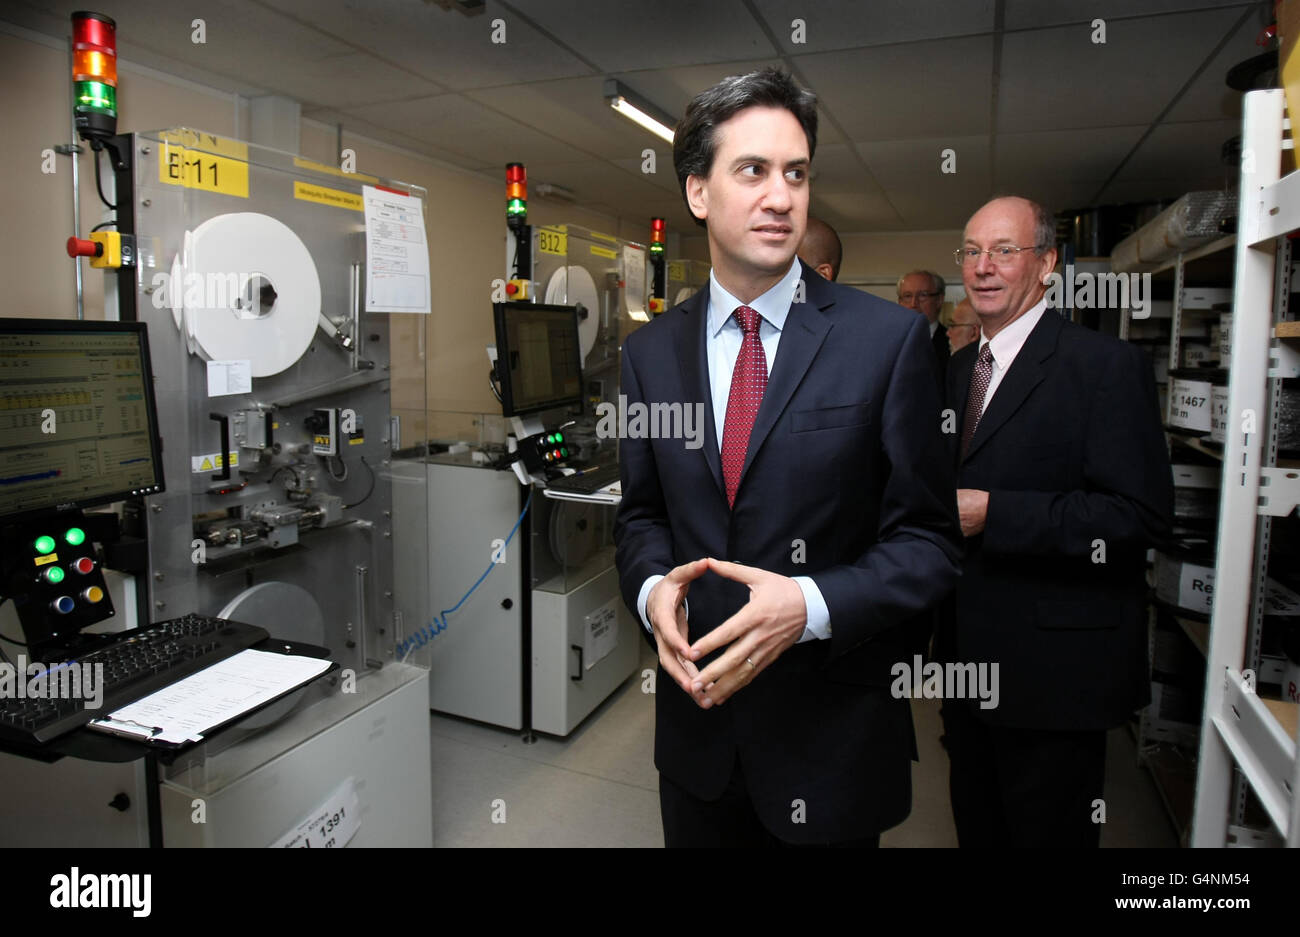 Labour Party leader Ed Miliband walks with Managing Director of TTP LabTech Dr Philip Blenkinsop during a visit to TTP group in Melbourn, Cambridgeshire. Stock Photo